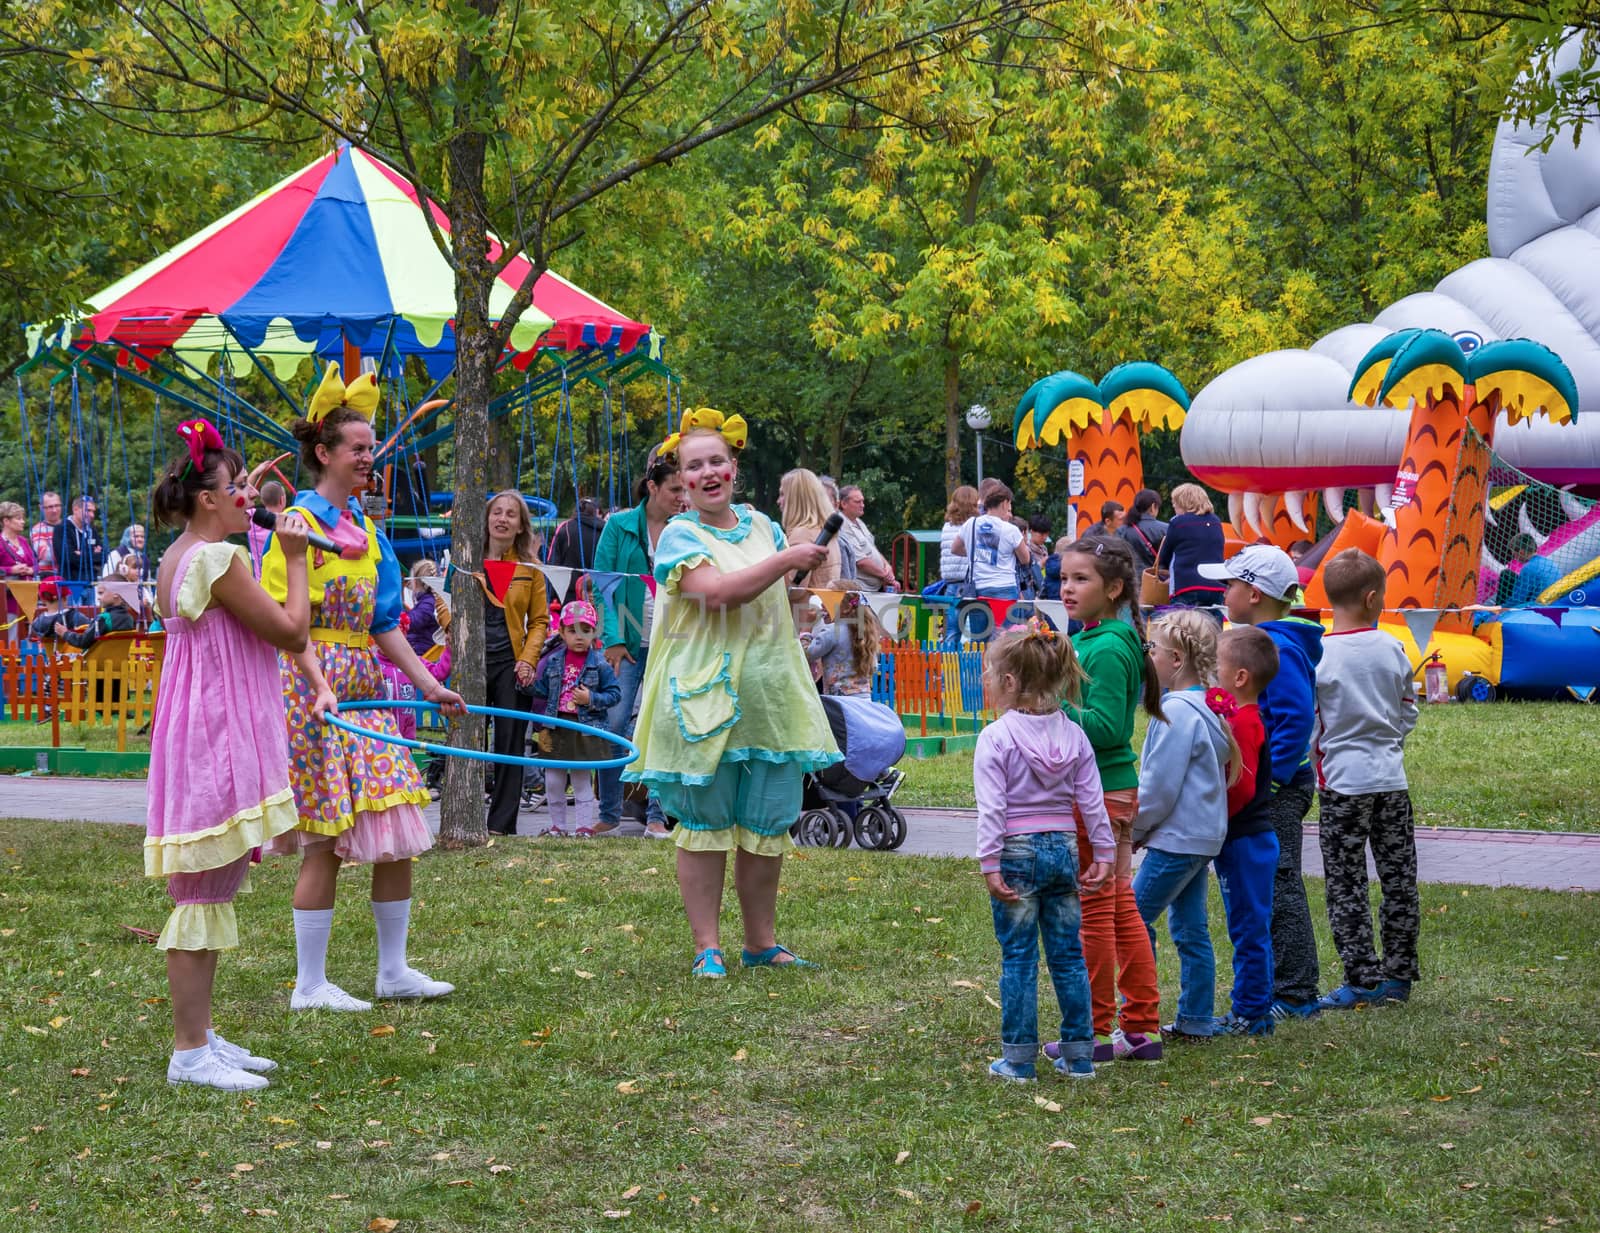 A group of children and disguised women play active outdoor games